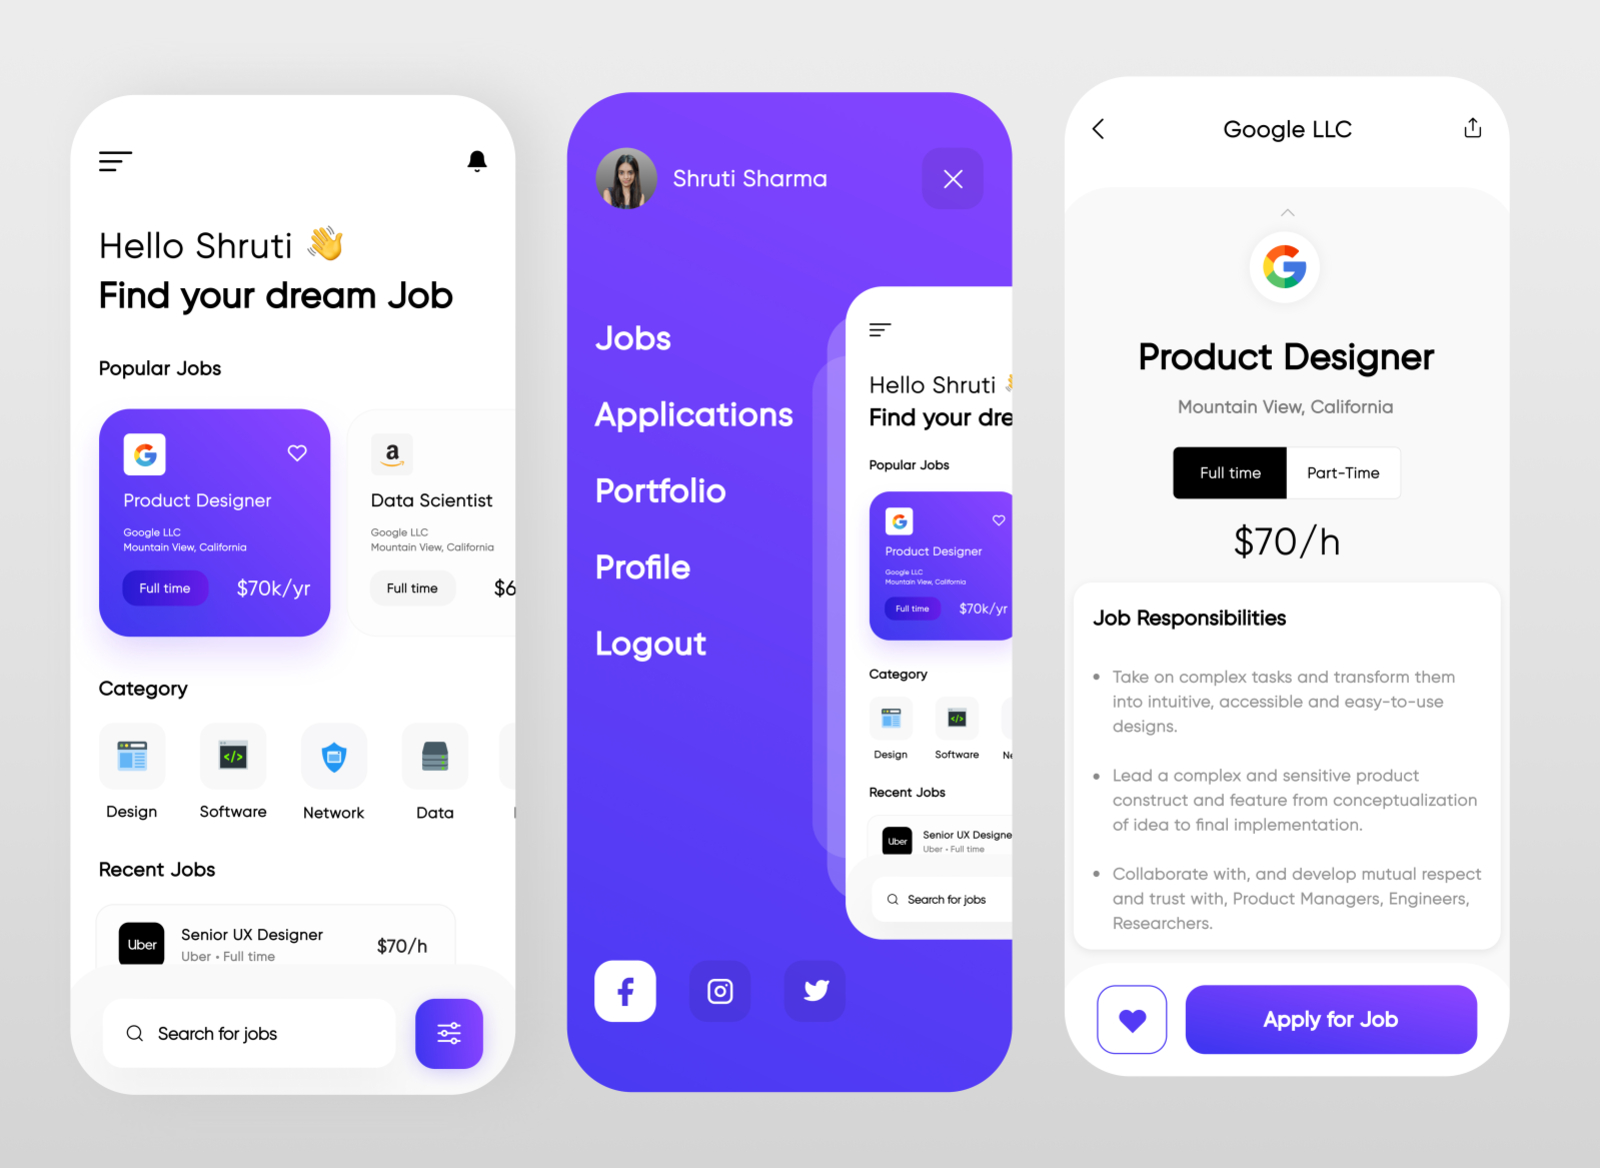  A screenshot of a mobile app that helps users find their dream job.